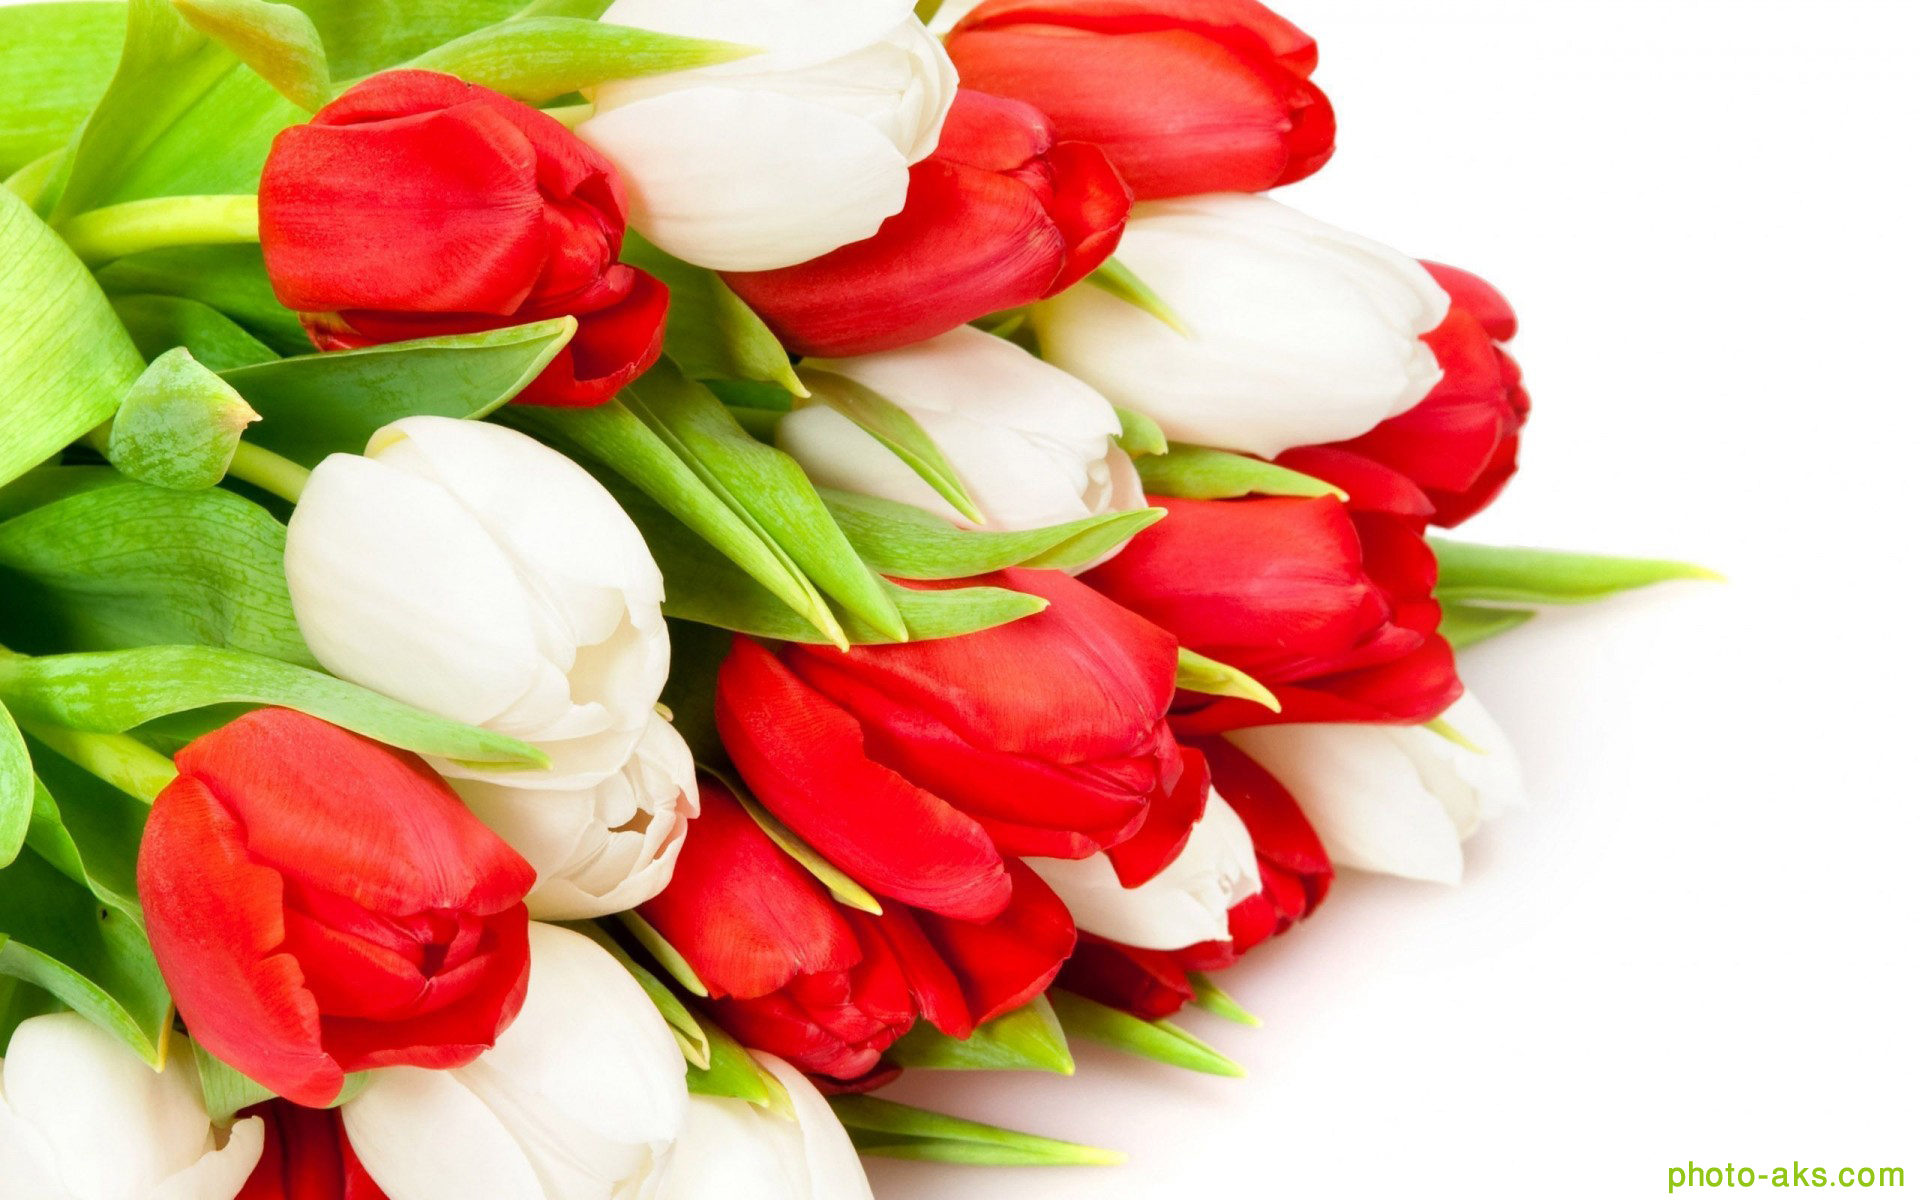 http://pic.photo-aks.com/photo/nature/flowers/tulip/large/Red-and-White-Tulips.jpg